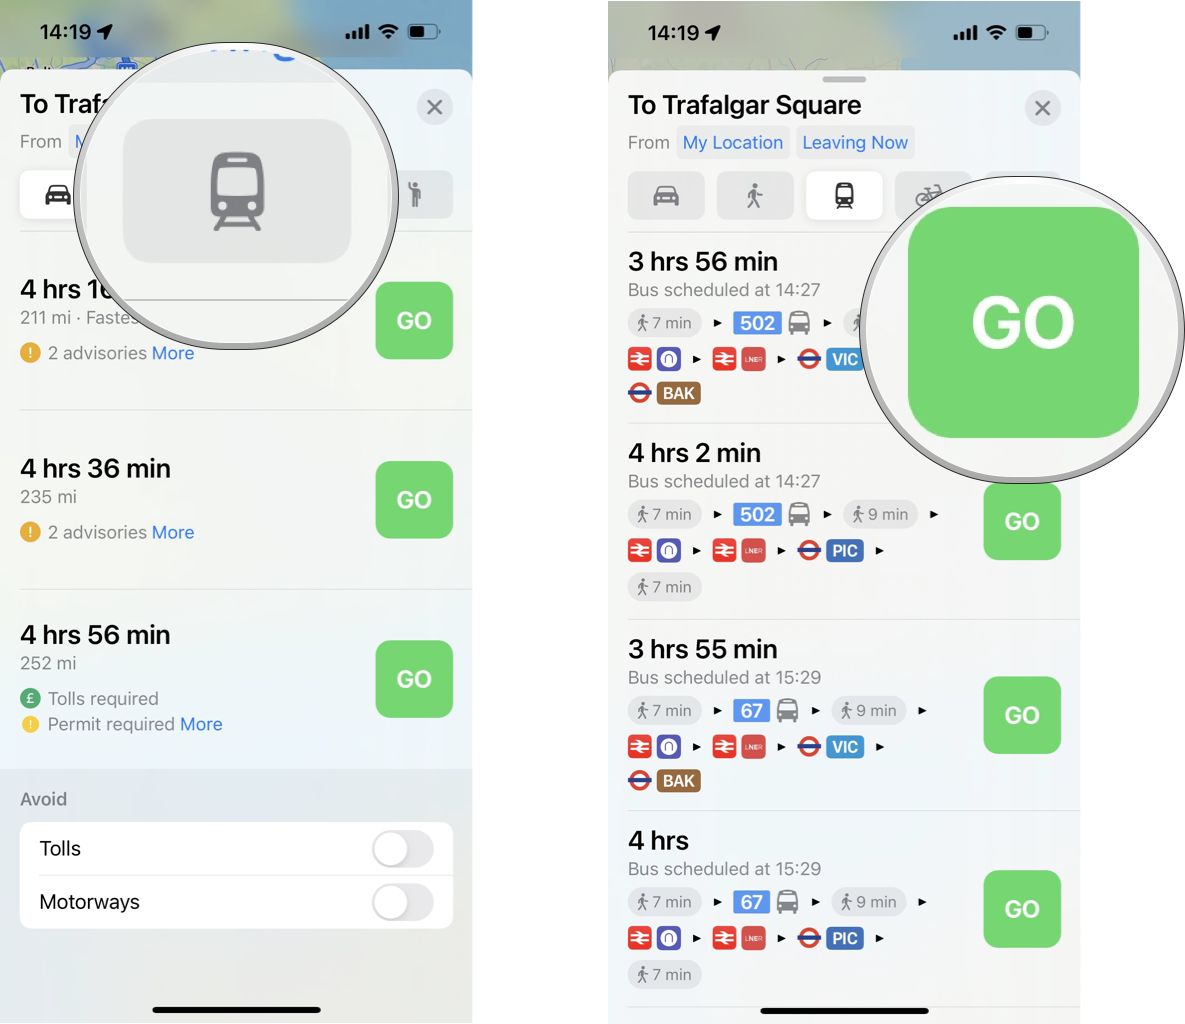 How to get transit directions: Switch to transit directions, tap GO on your selected route.